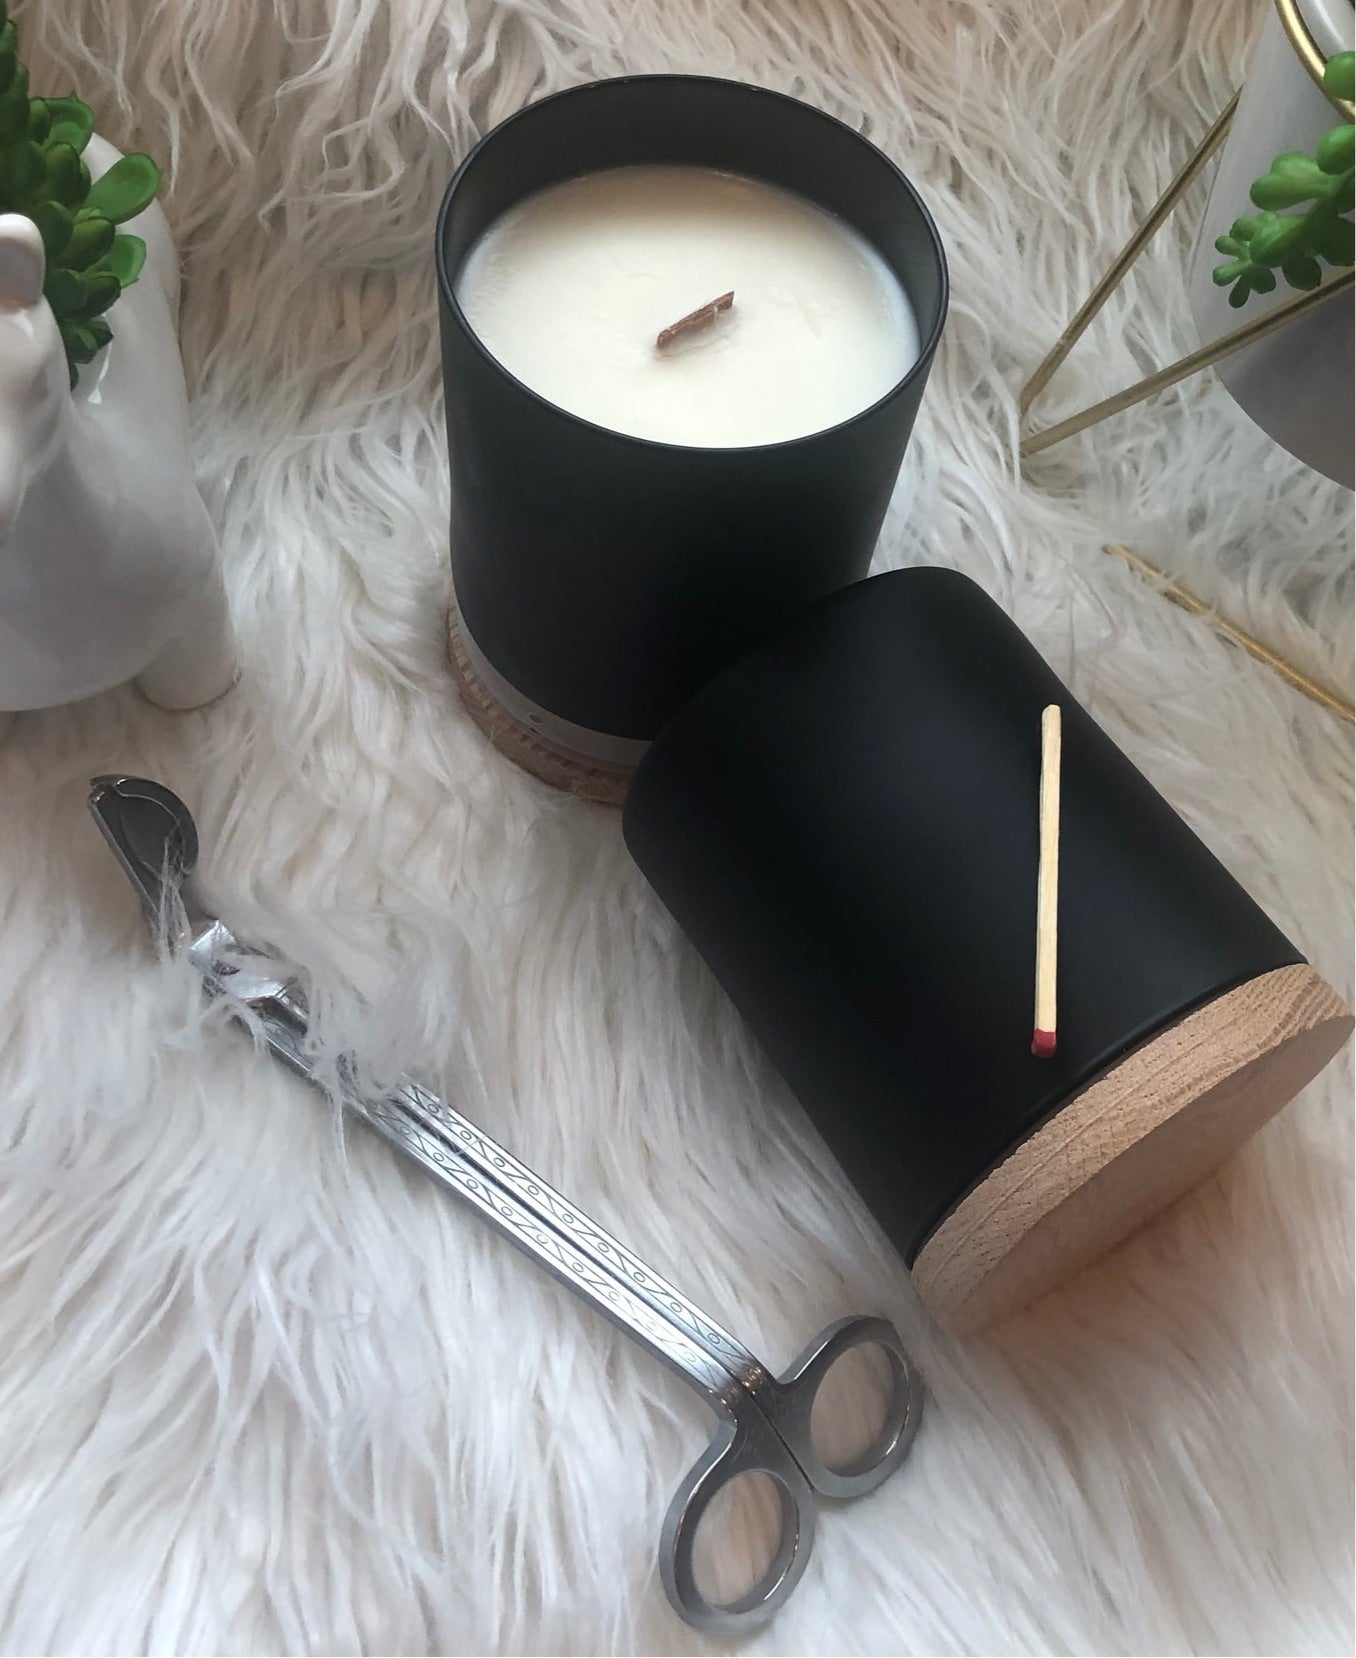 Selfcare candle is a spa scent with citrus notes